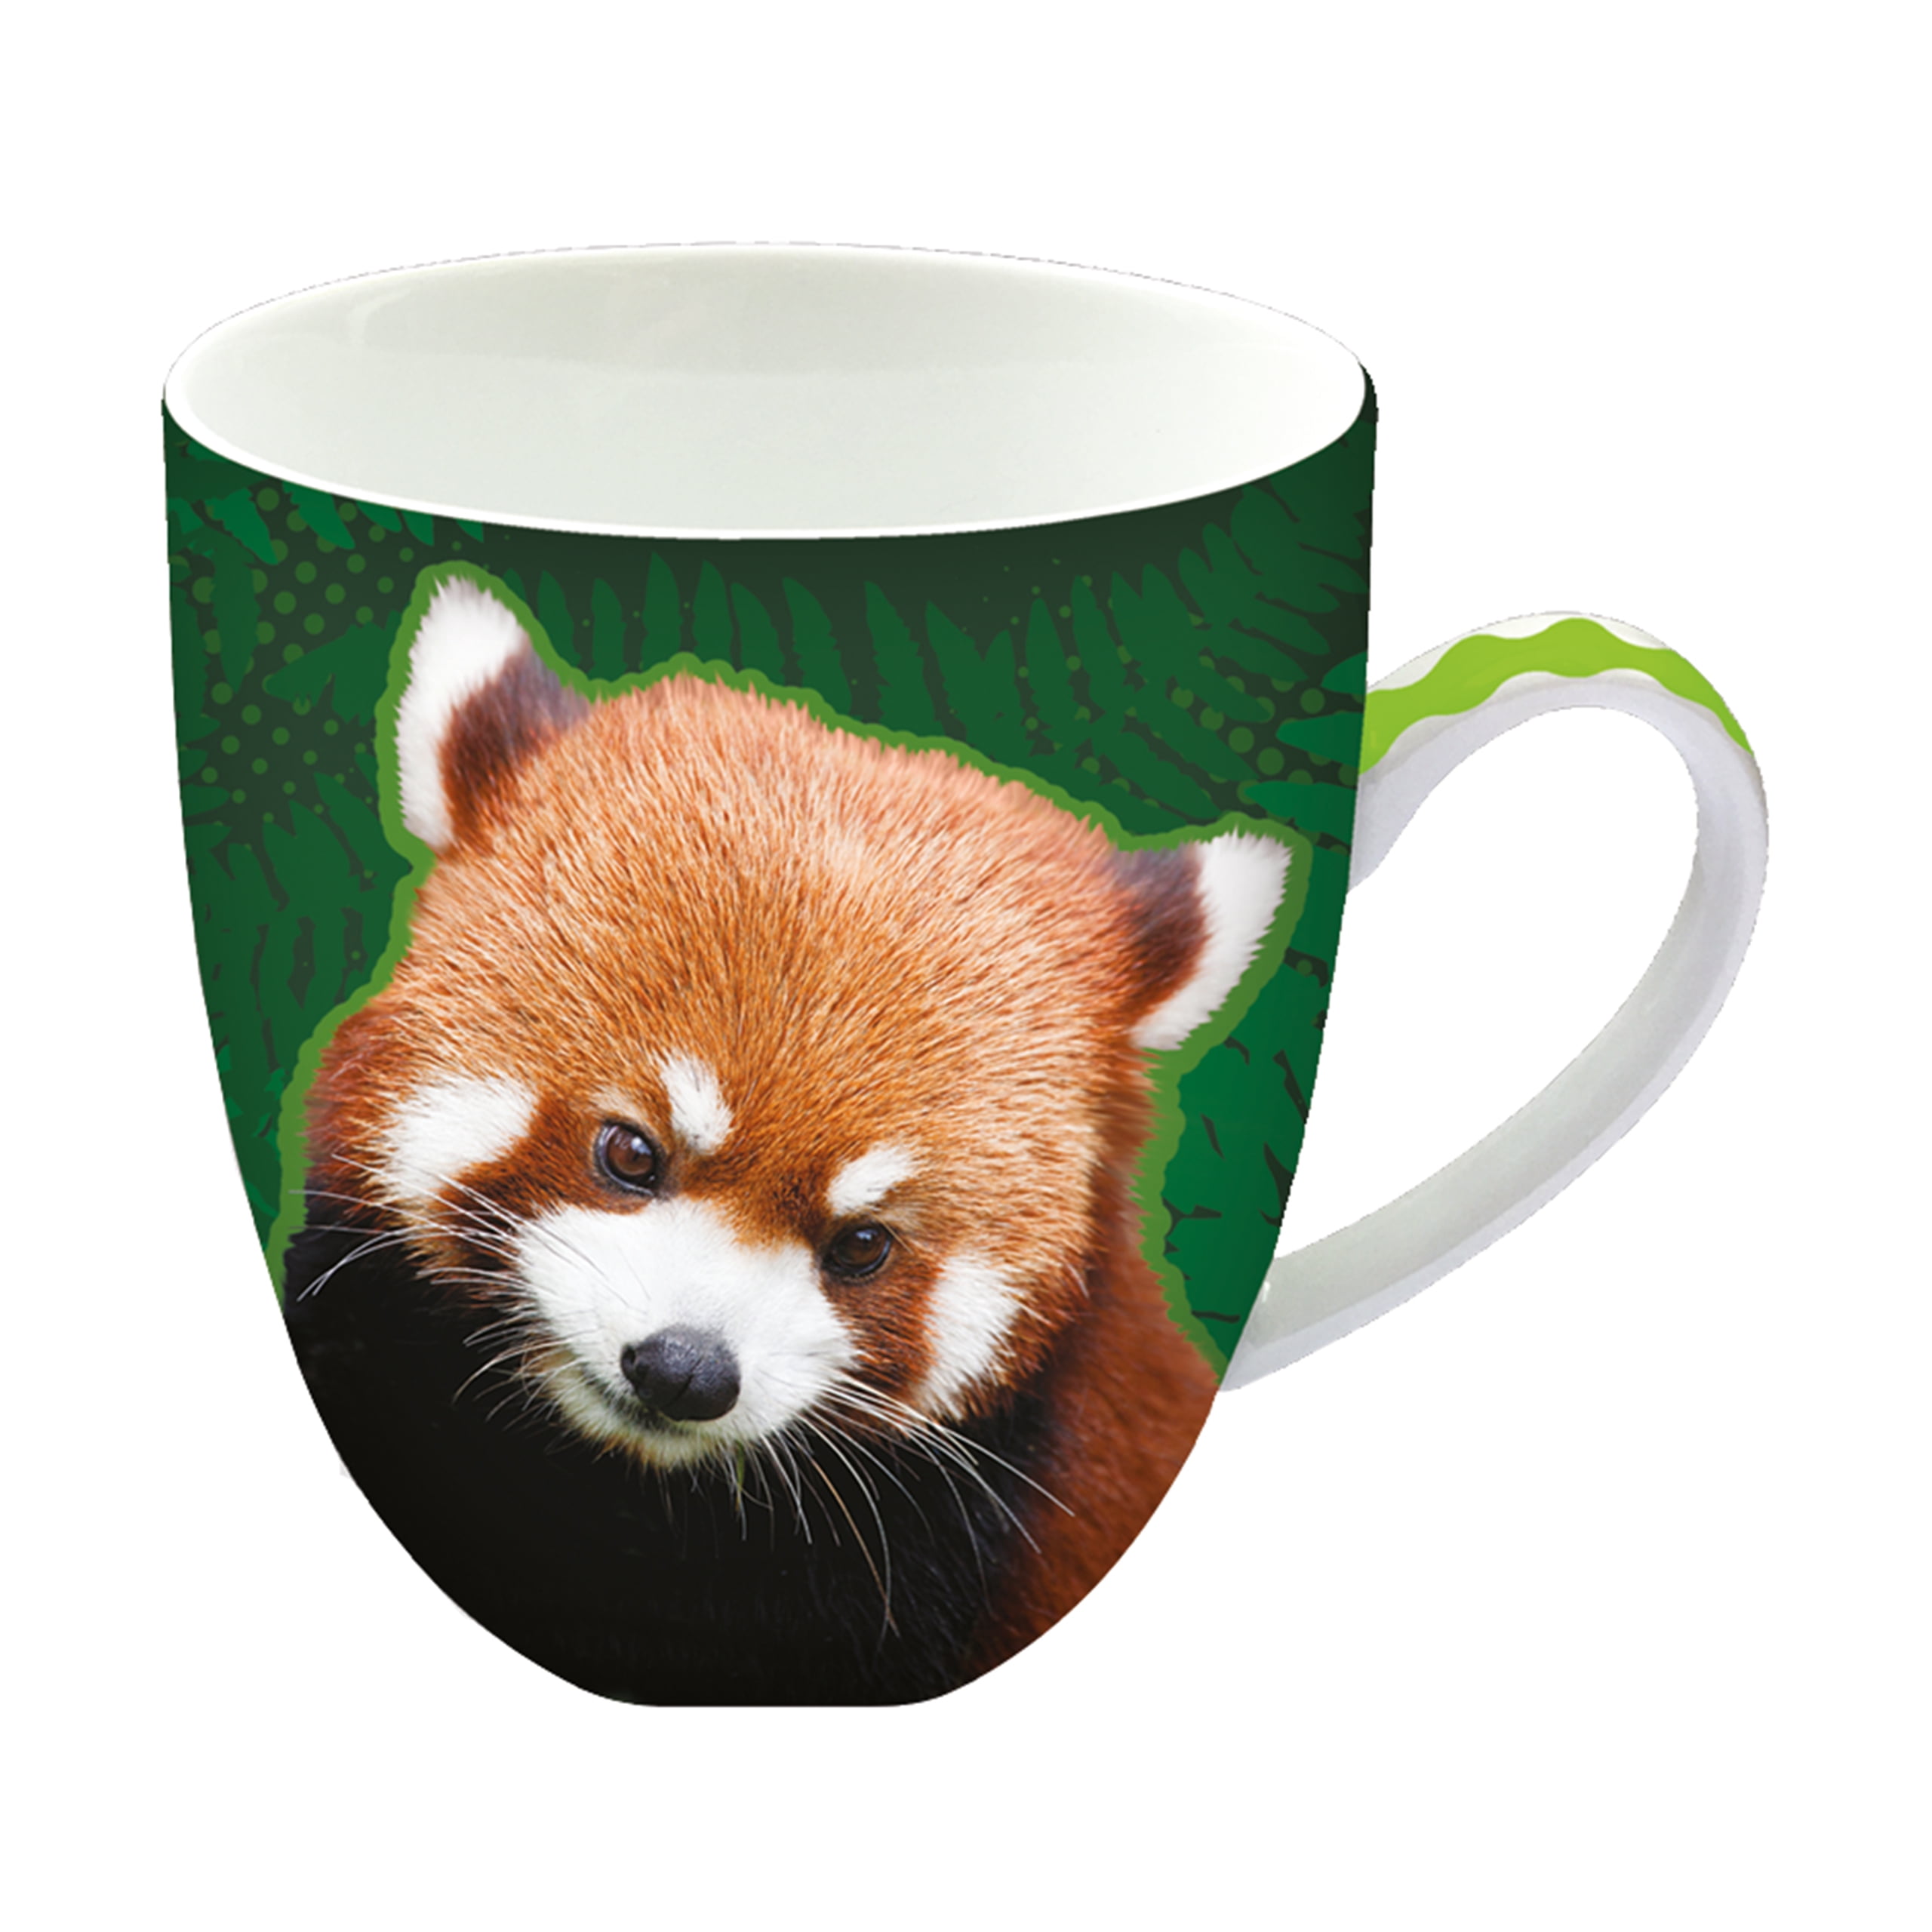 Animug - Red Panda from Deluxebase. 15 Fl Oz large mug. A Red Panda mug that is a great new coffee cup or tea cup. Fantastic for red panda gifts. - Walmart.com